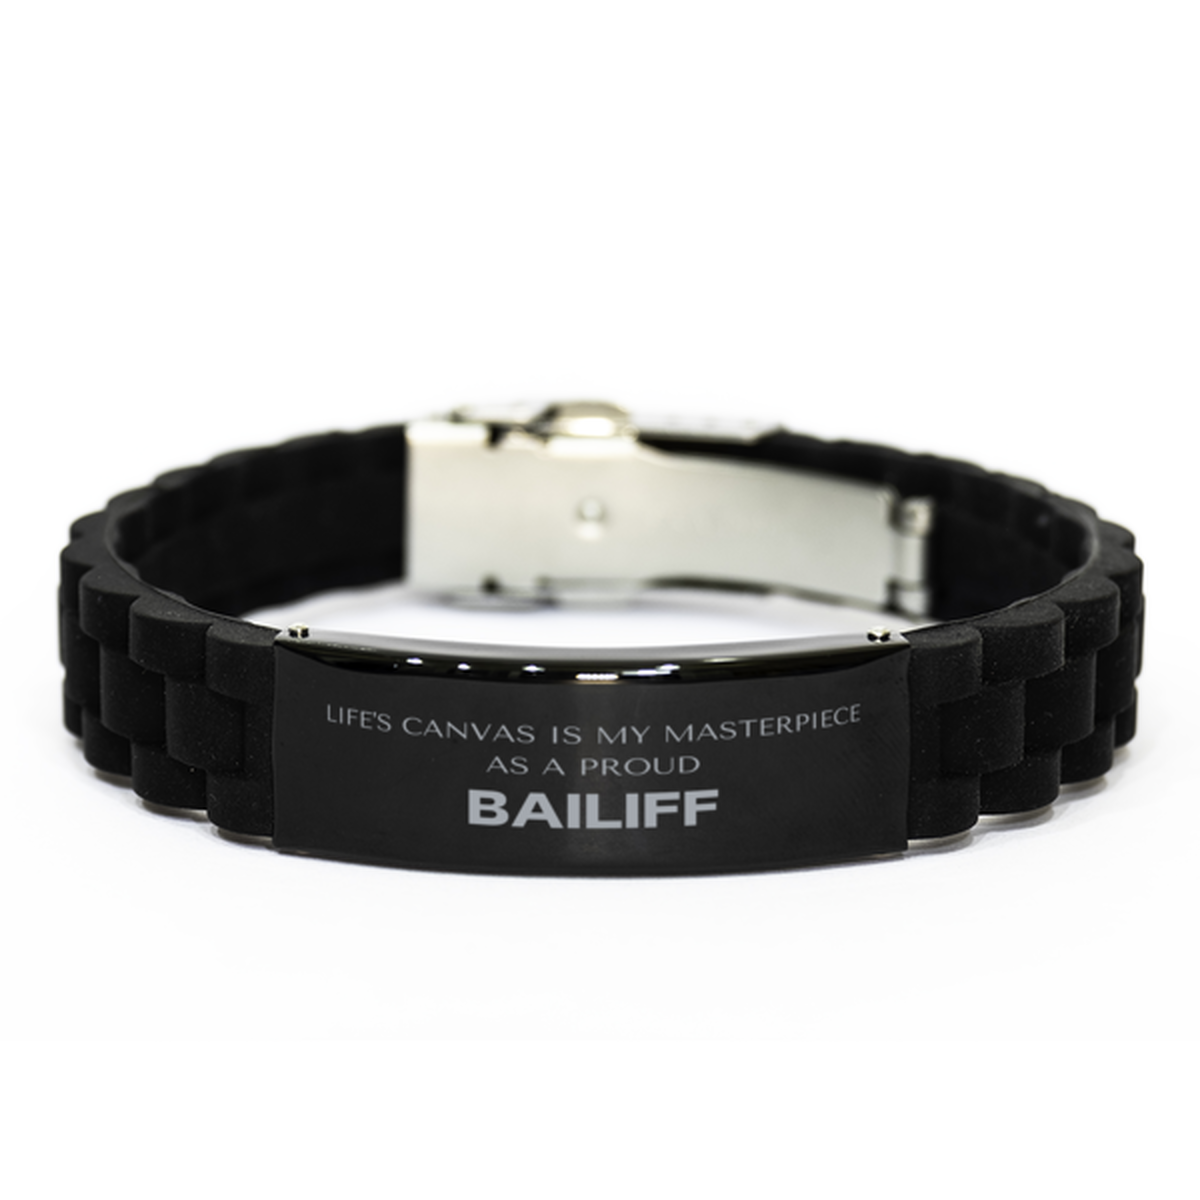 Proud Bailiff Gifts, Life's canvas is my masterpiece, Epic Birthday Christmas Unique Black Glidelock Clasp Bracelet For Bailiff, Coworkers, Men, Women, Friends